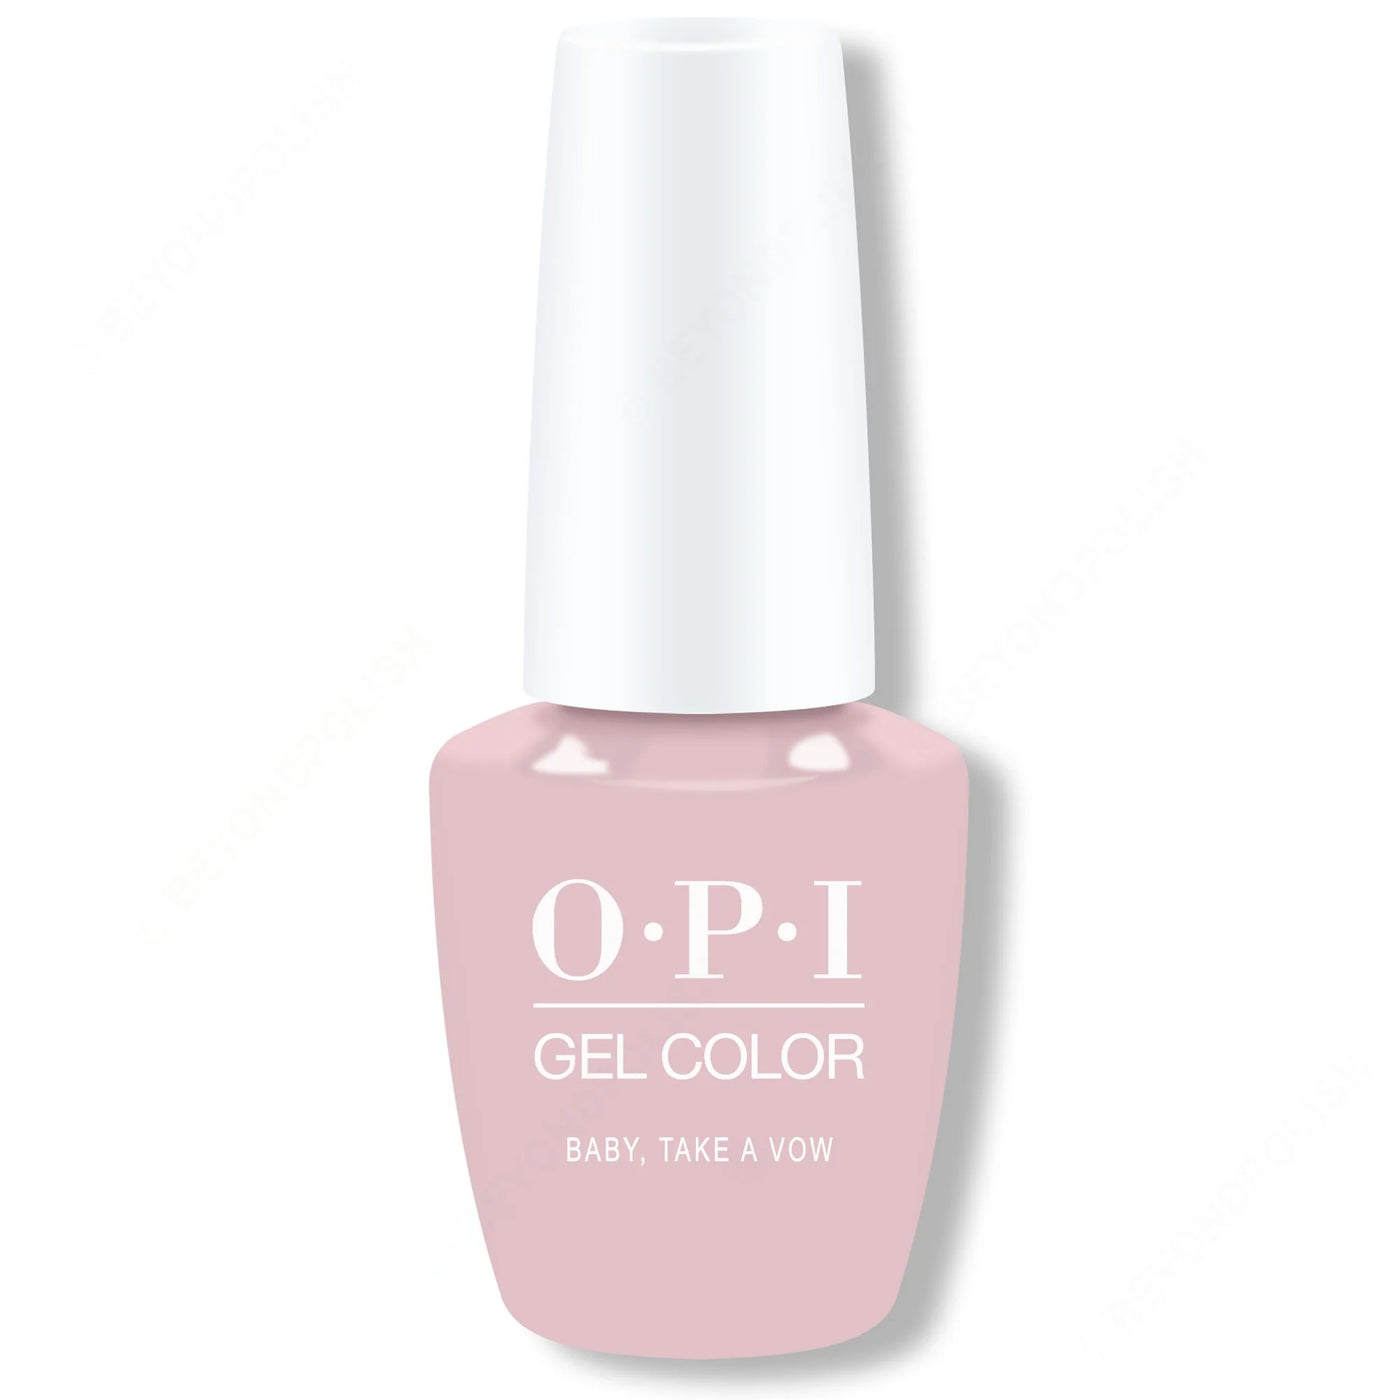 OPI Gel Color - Baby, Take a Vow GC SH1